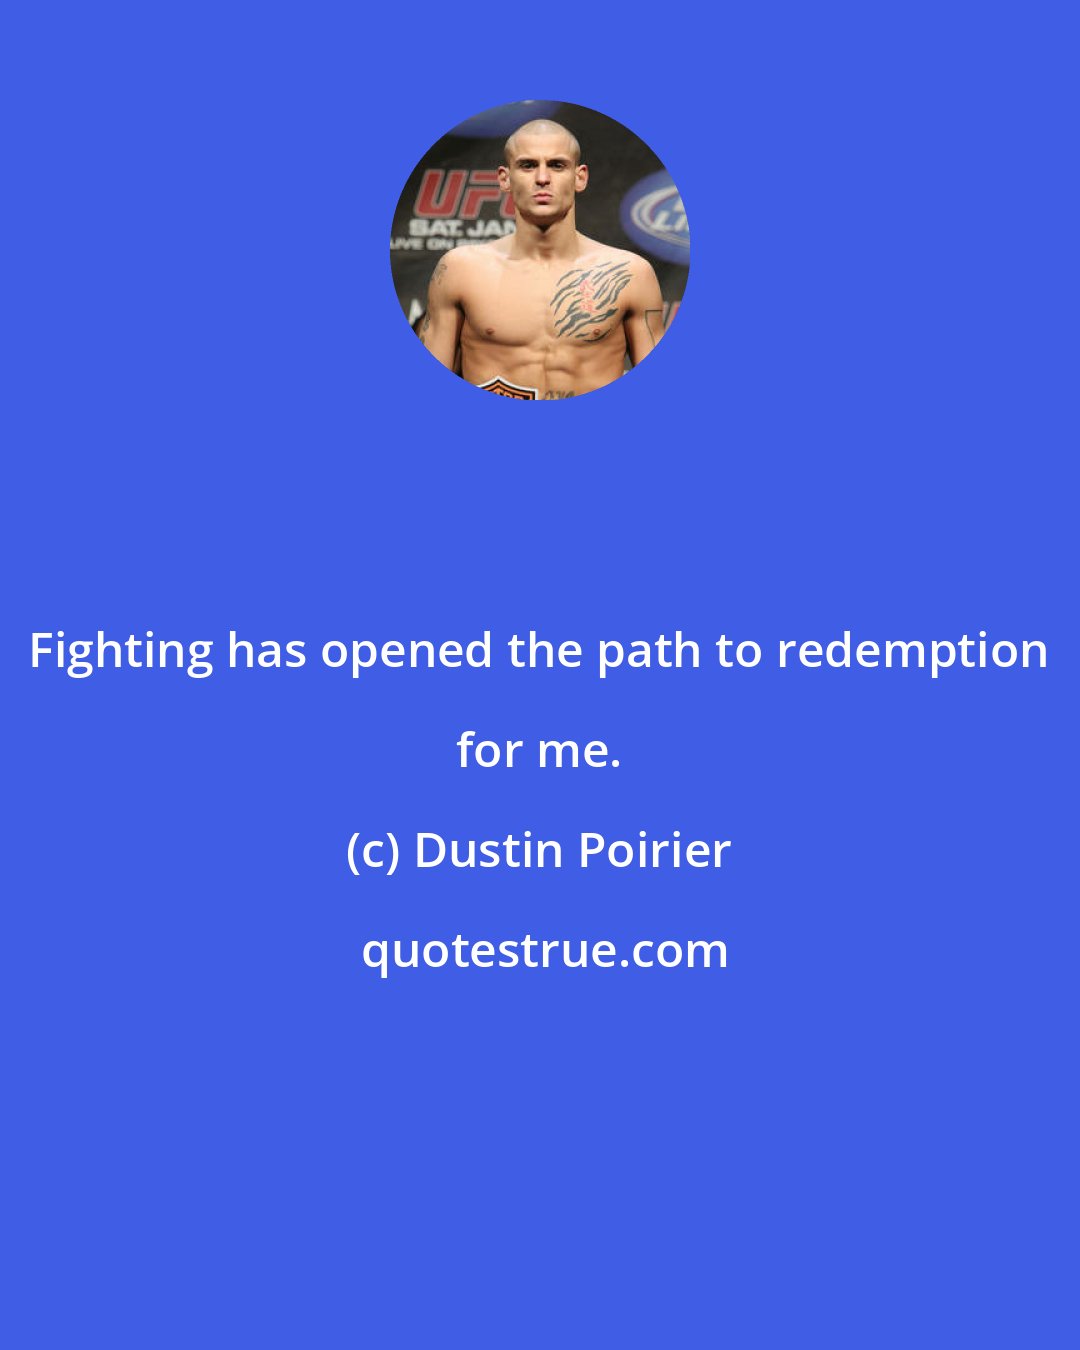 Dustin Poirier: Fighting has opened the path to redemption for me.